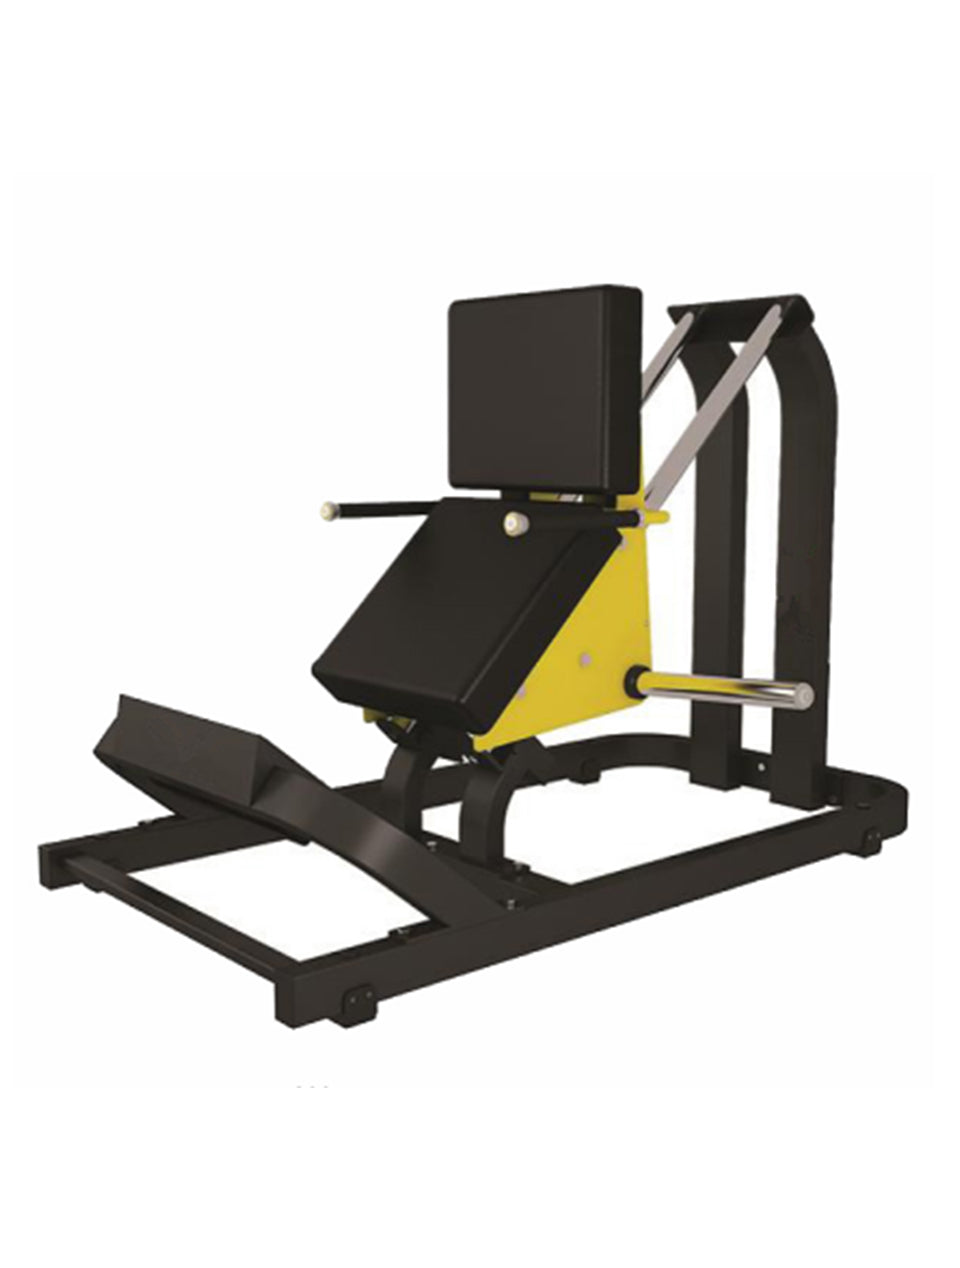 1441 Fitness Hack Squat Plate Loaded - 41FGT945